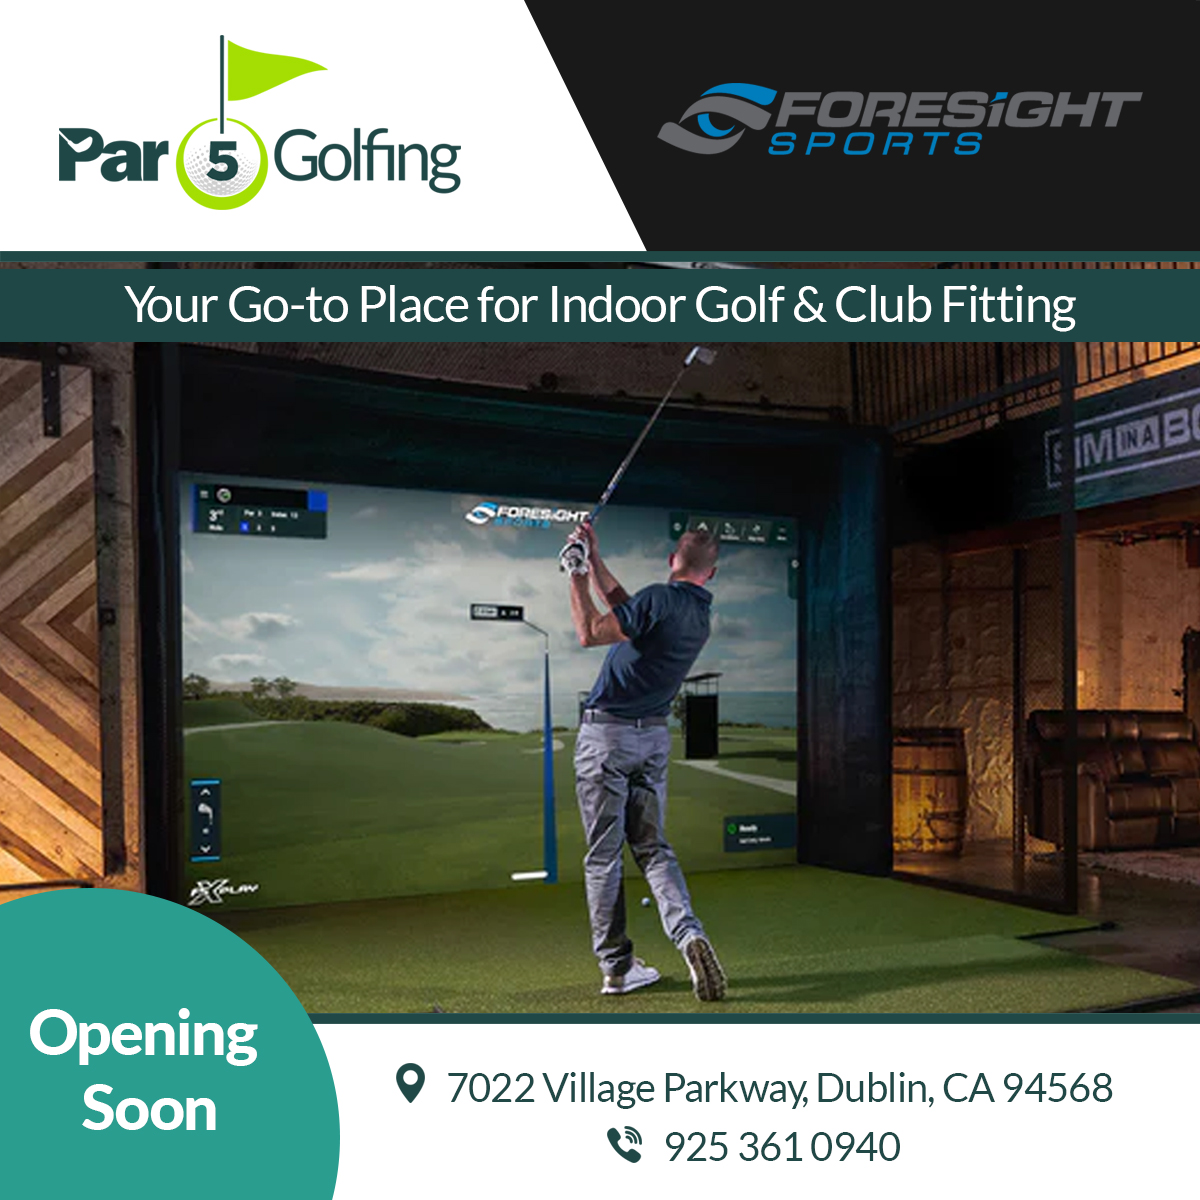 #Par5Golfing is going to have #Foresight #GolfSimulator for custom fittings, lessons, and corporate events. 

#golf #golfing #golfevent #golftravel #golfclub #golfpro #golfer #golffun #golftraining #golfstore #PGAtour #masters #touredge #golflesson